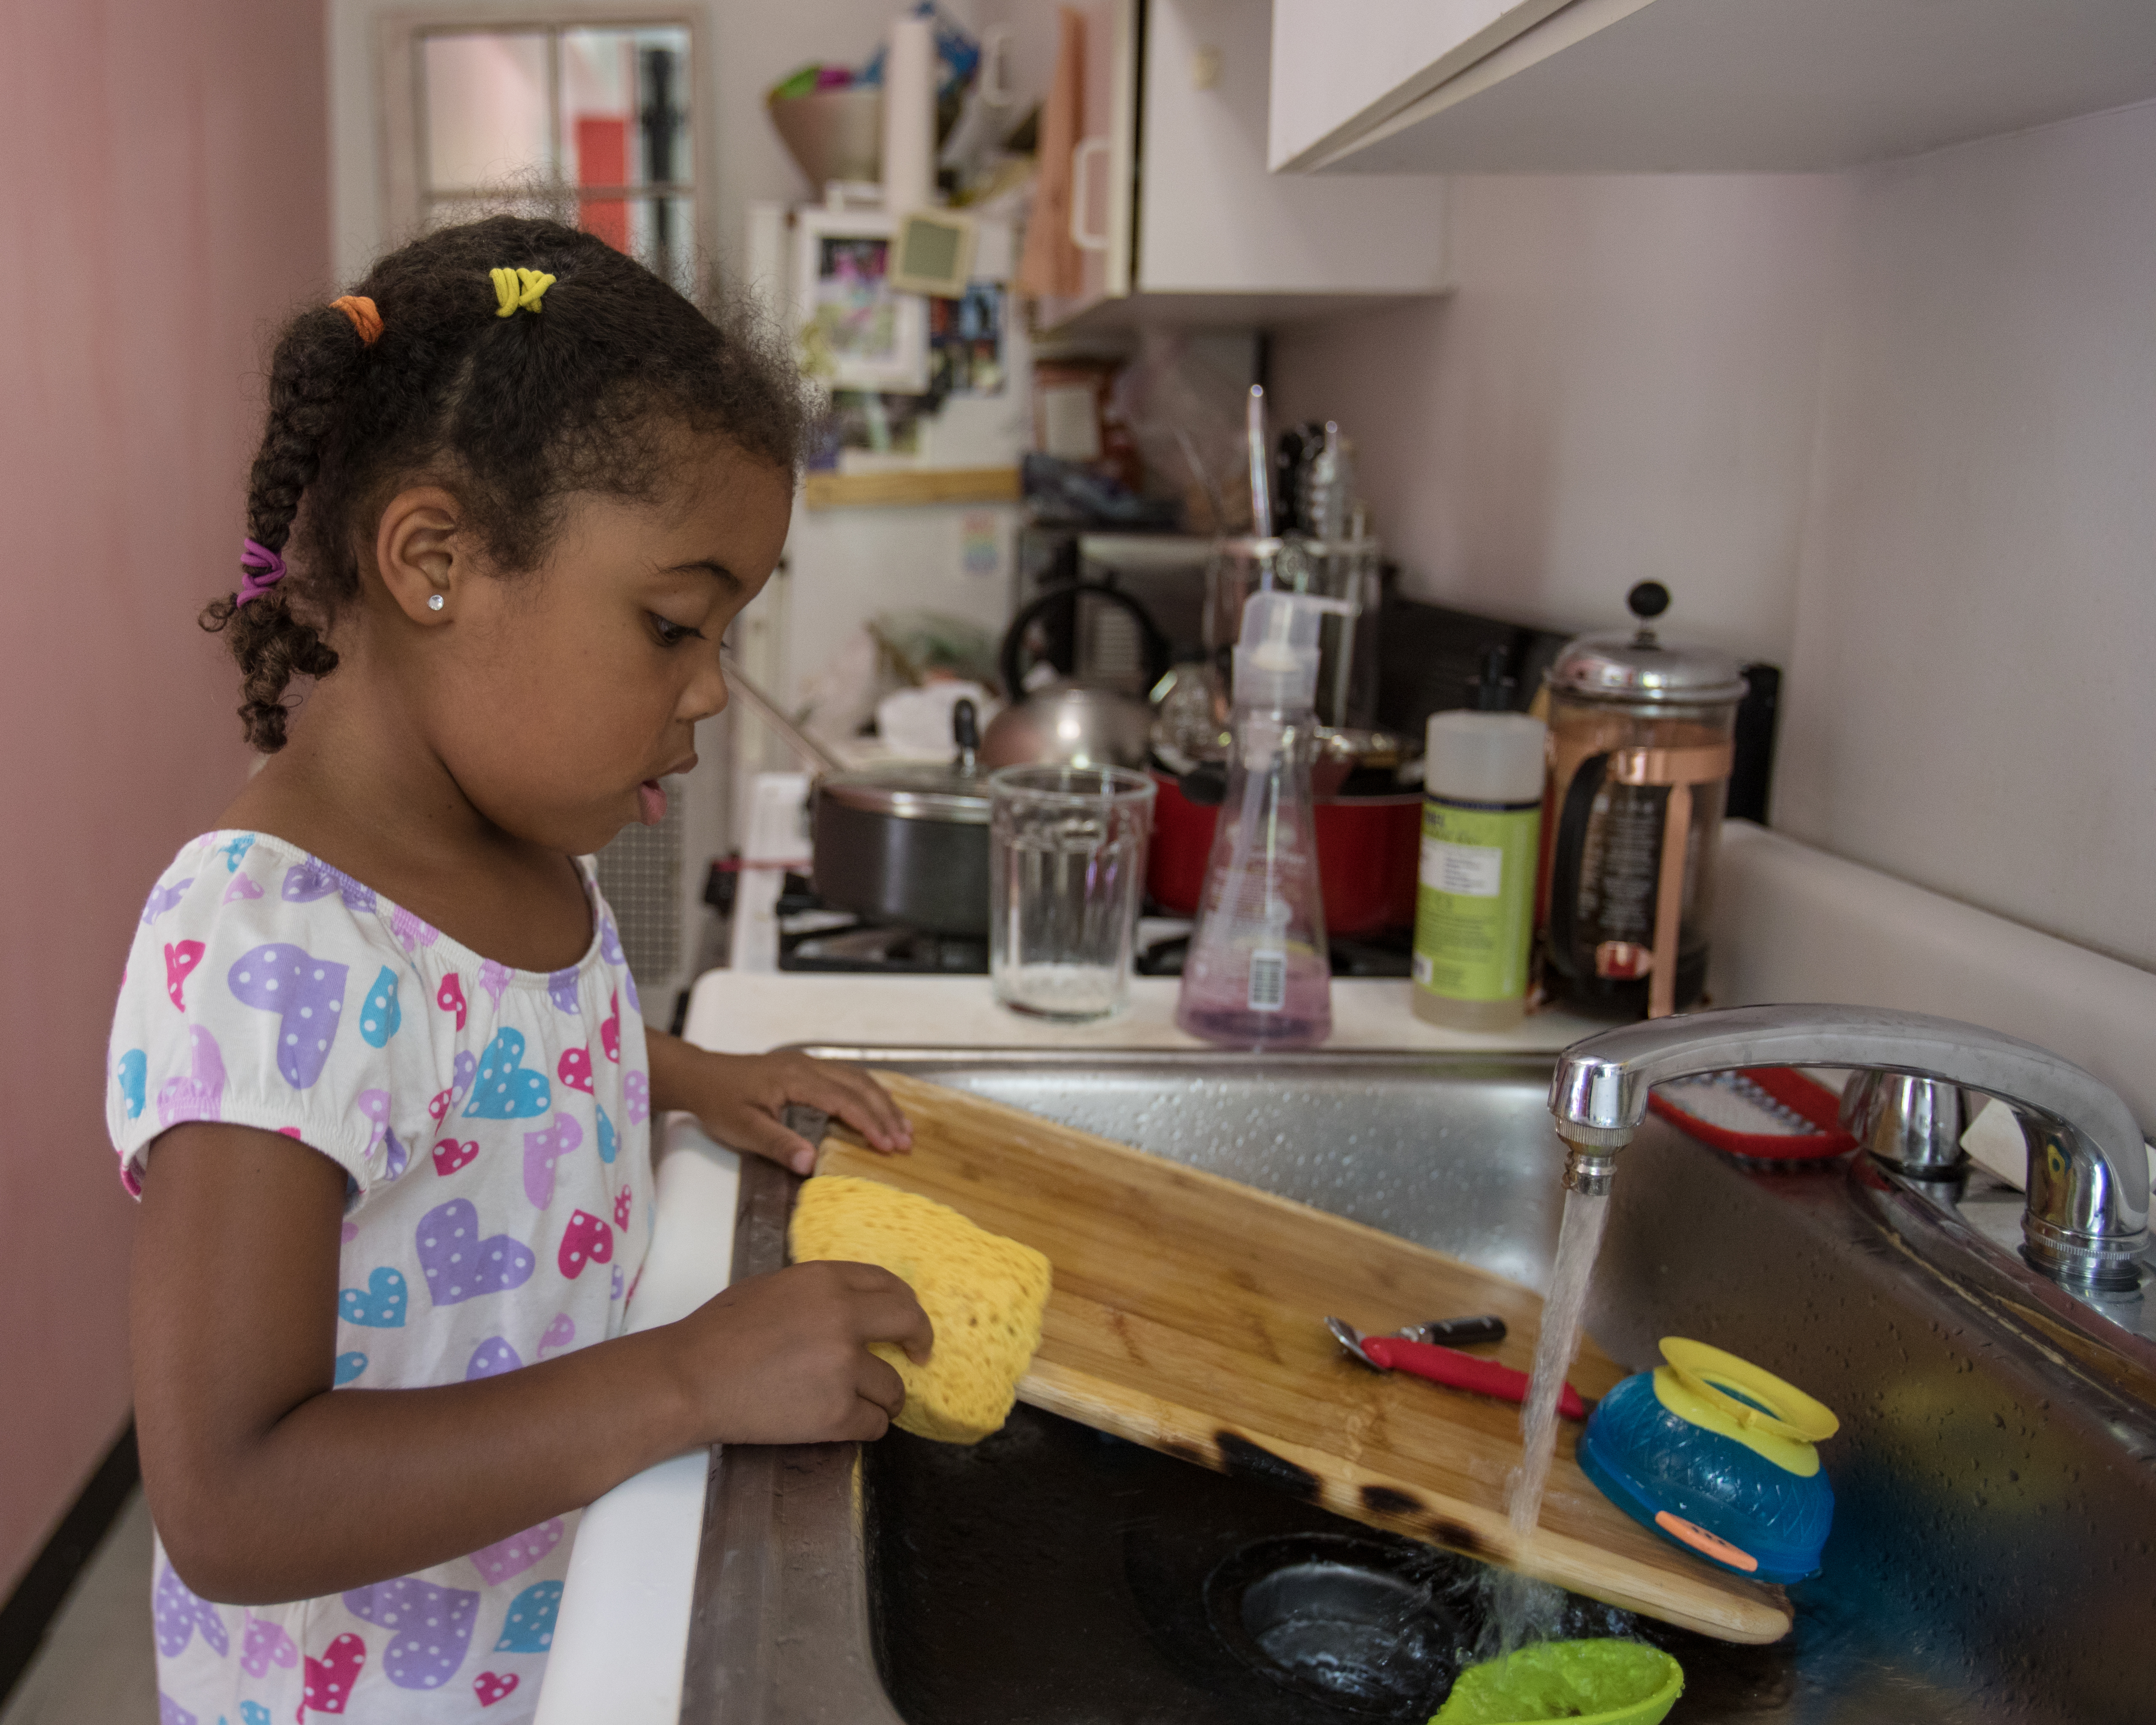 A young girl washes dishes in a kitchen | Source: Getty Images